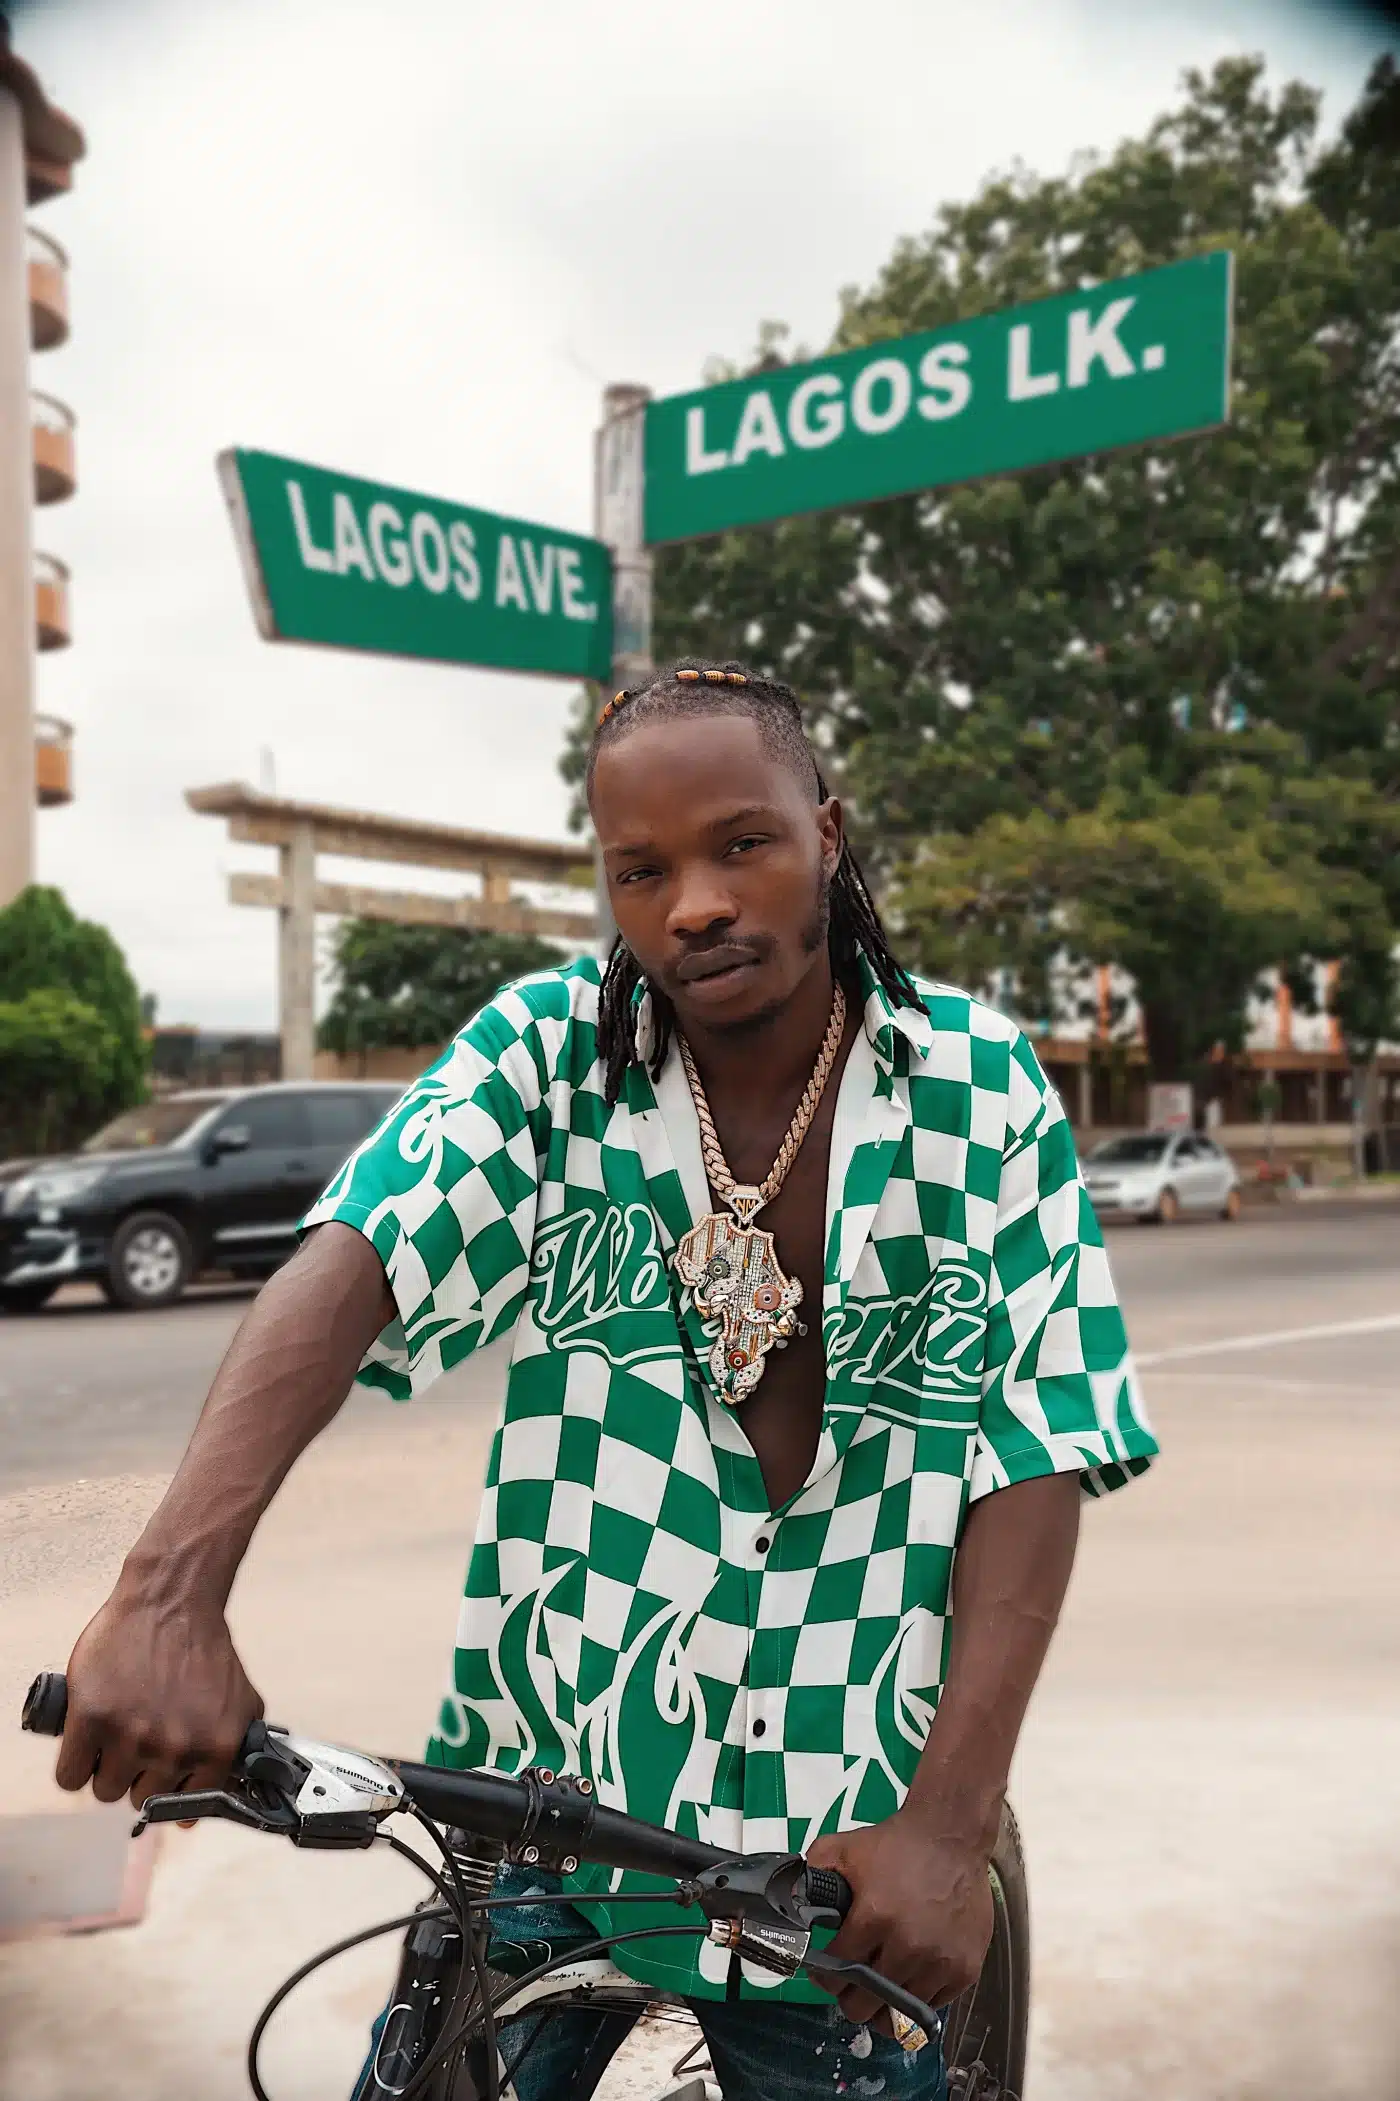 "I've been arrested 124 times in UK" – Throwback video of Naira Marley surfaces 